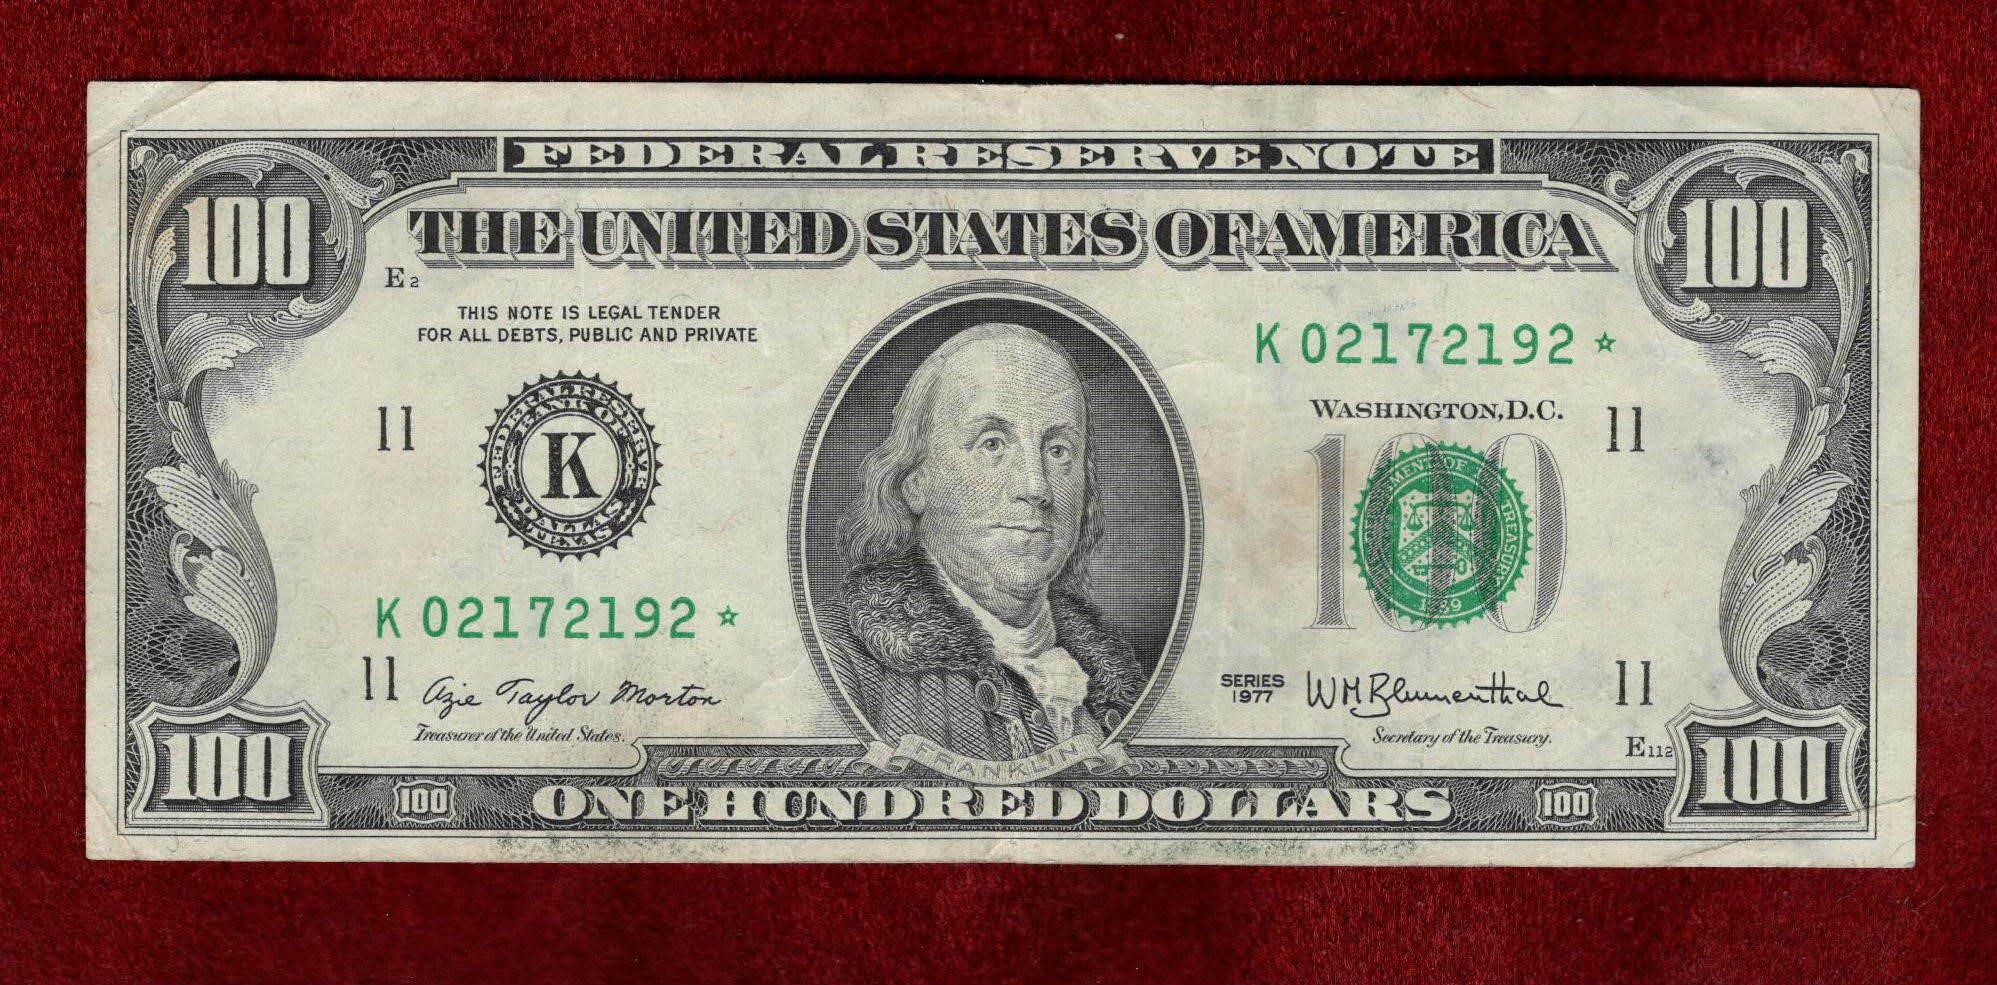 USA 1977 ASTERISK REPLACEMENT $100 BANKNOTE